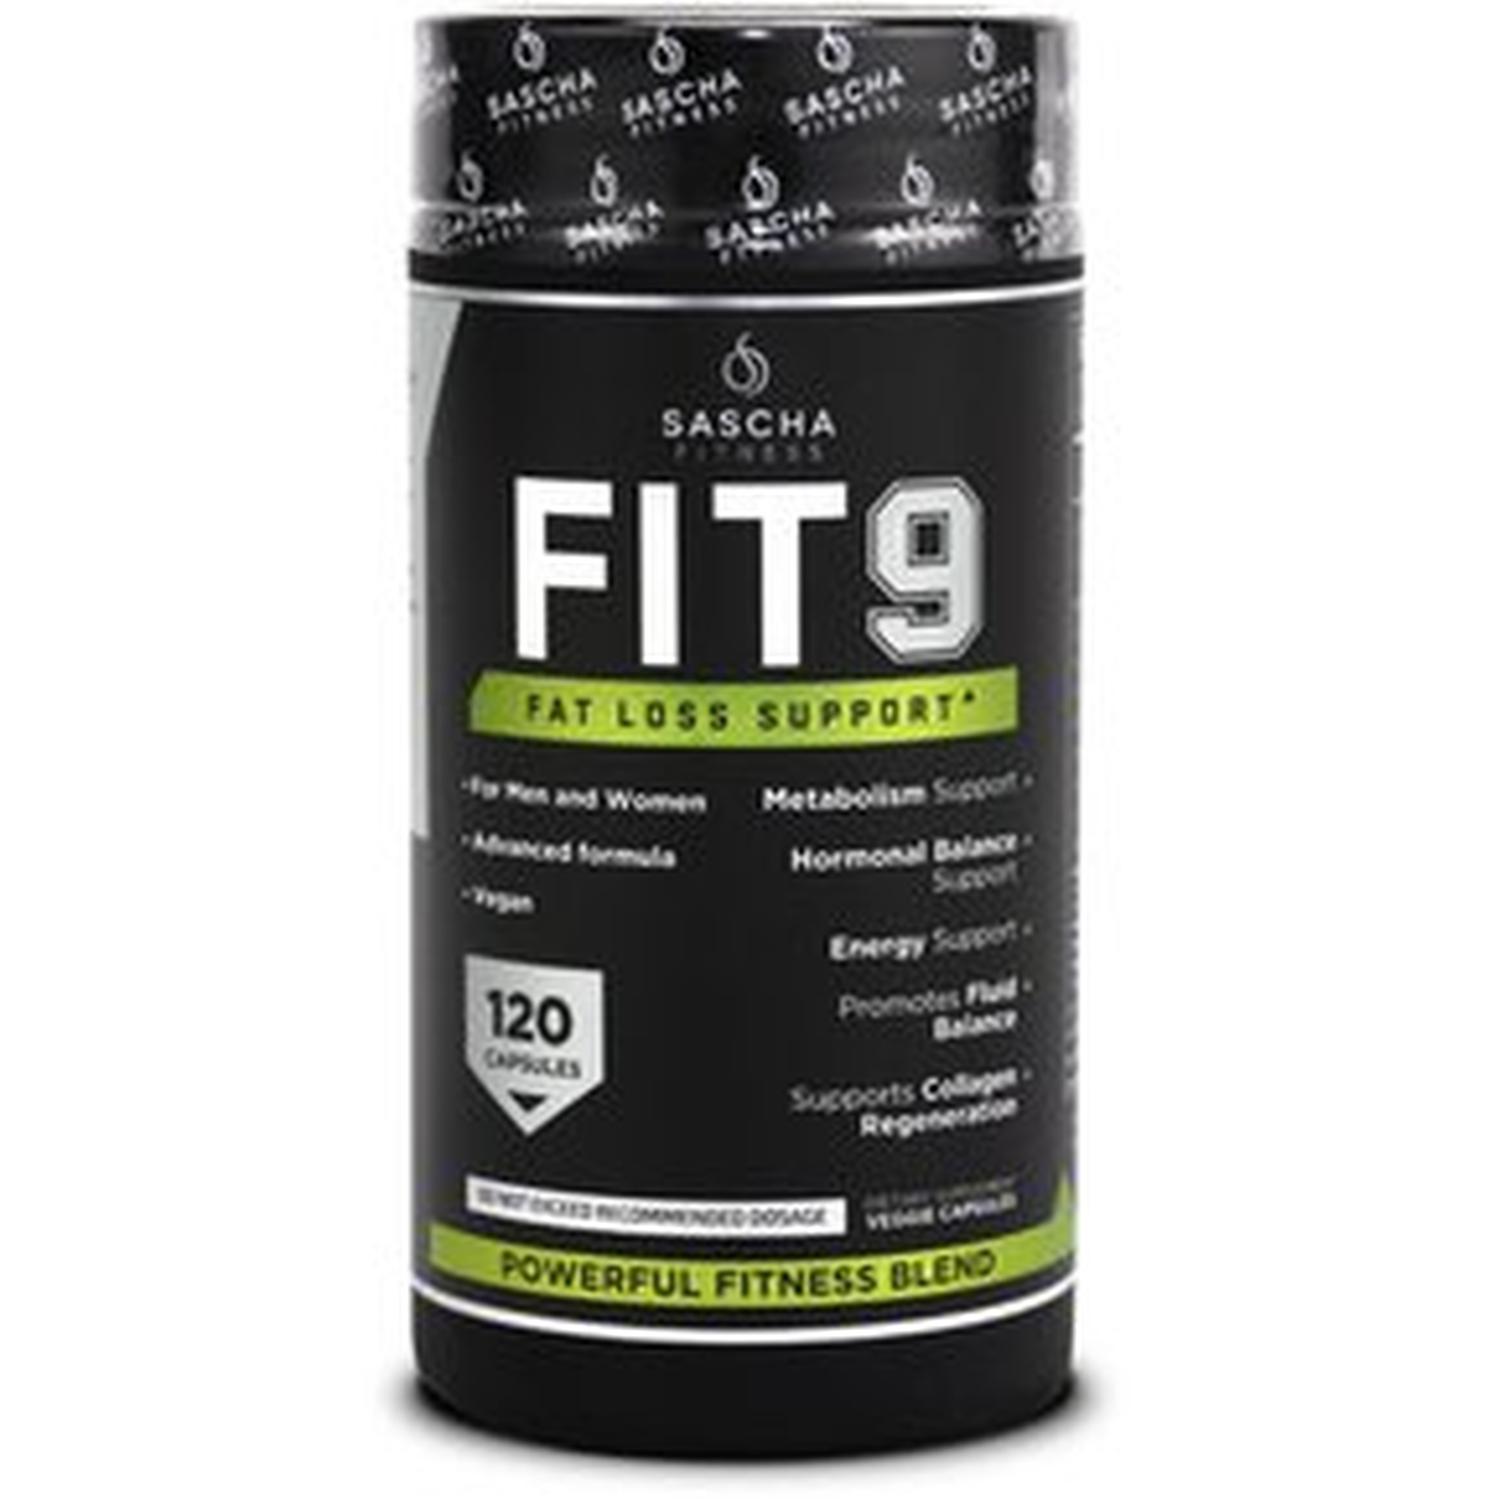 Fit 9 Sascha Fitness Fat Loss Support Powerful Fitness 120 Capsulas